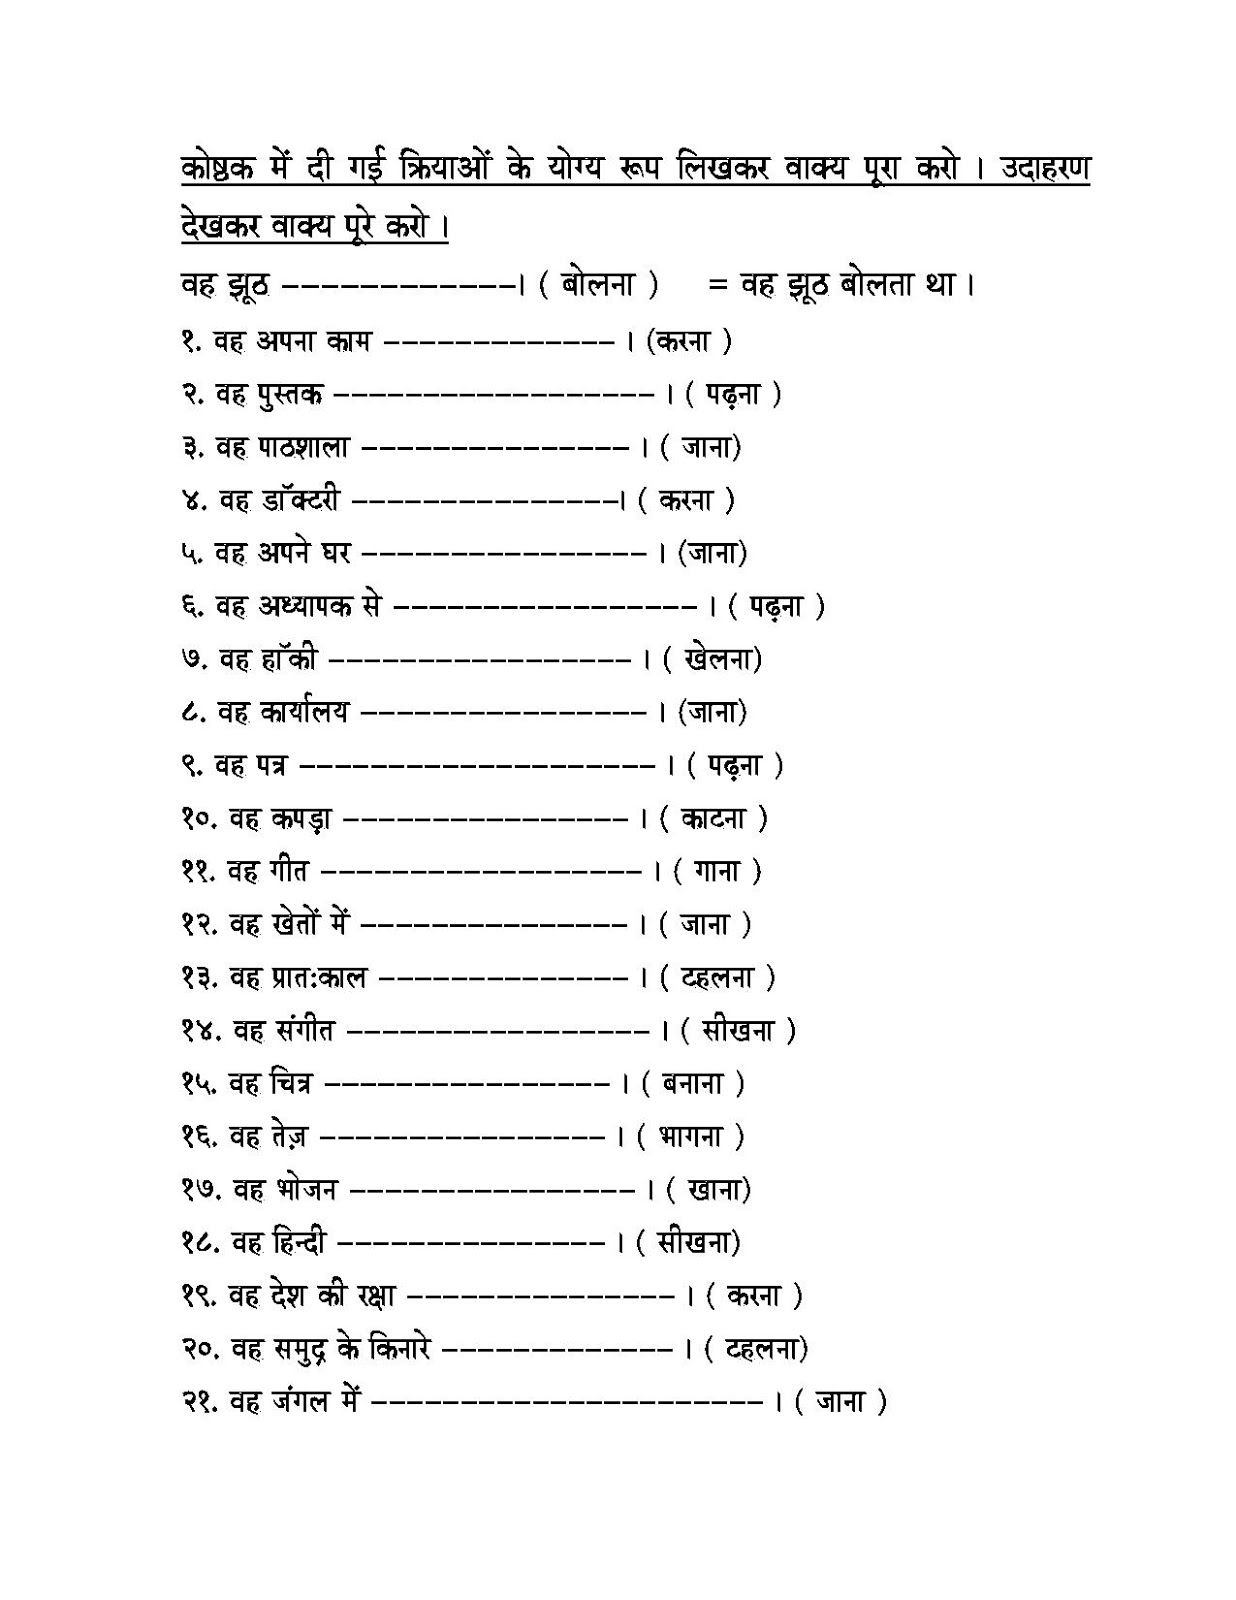 Hindi Grammar Work Sheet Collection for Classes 5,6, 7 & 8: Tenses Work